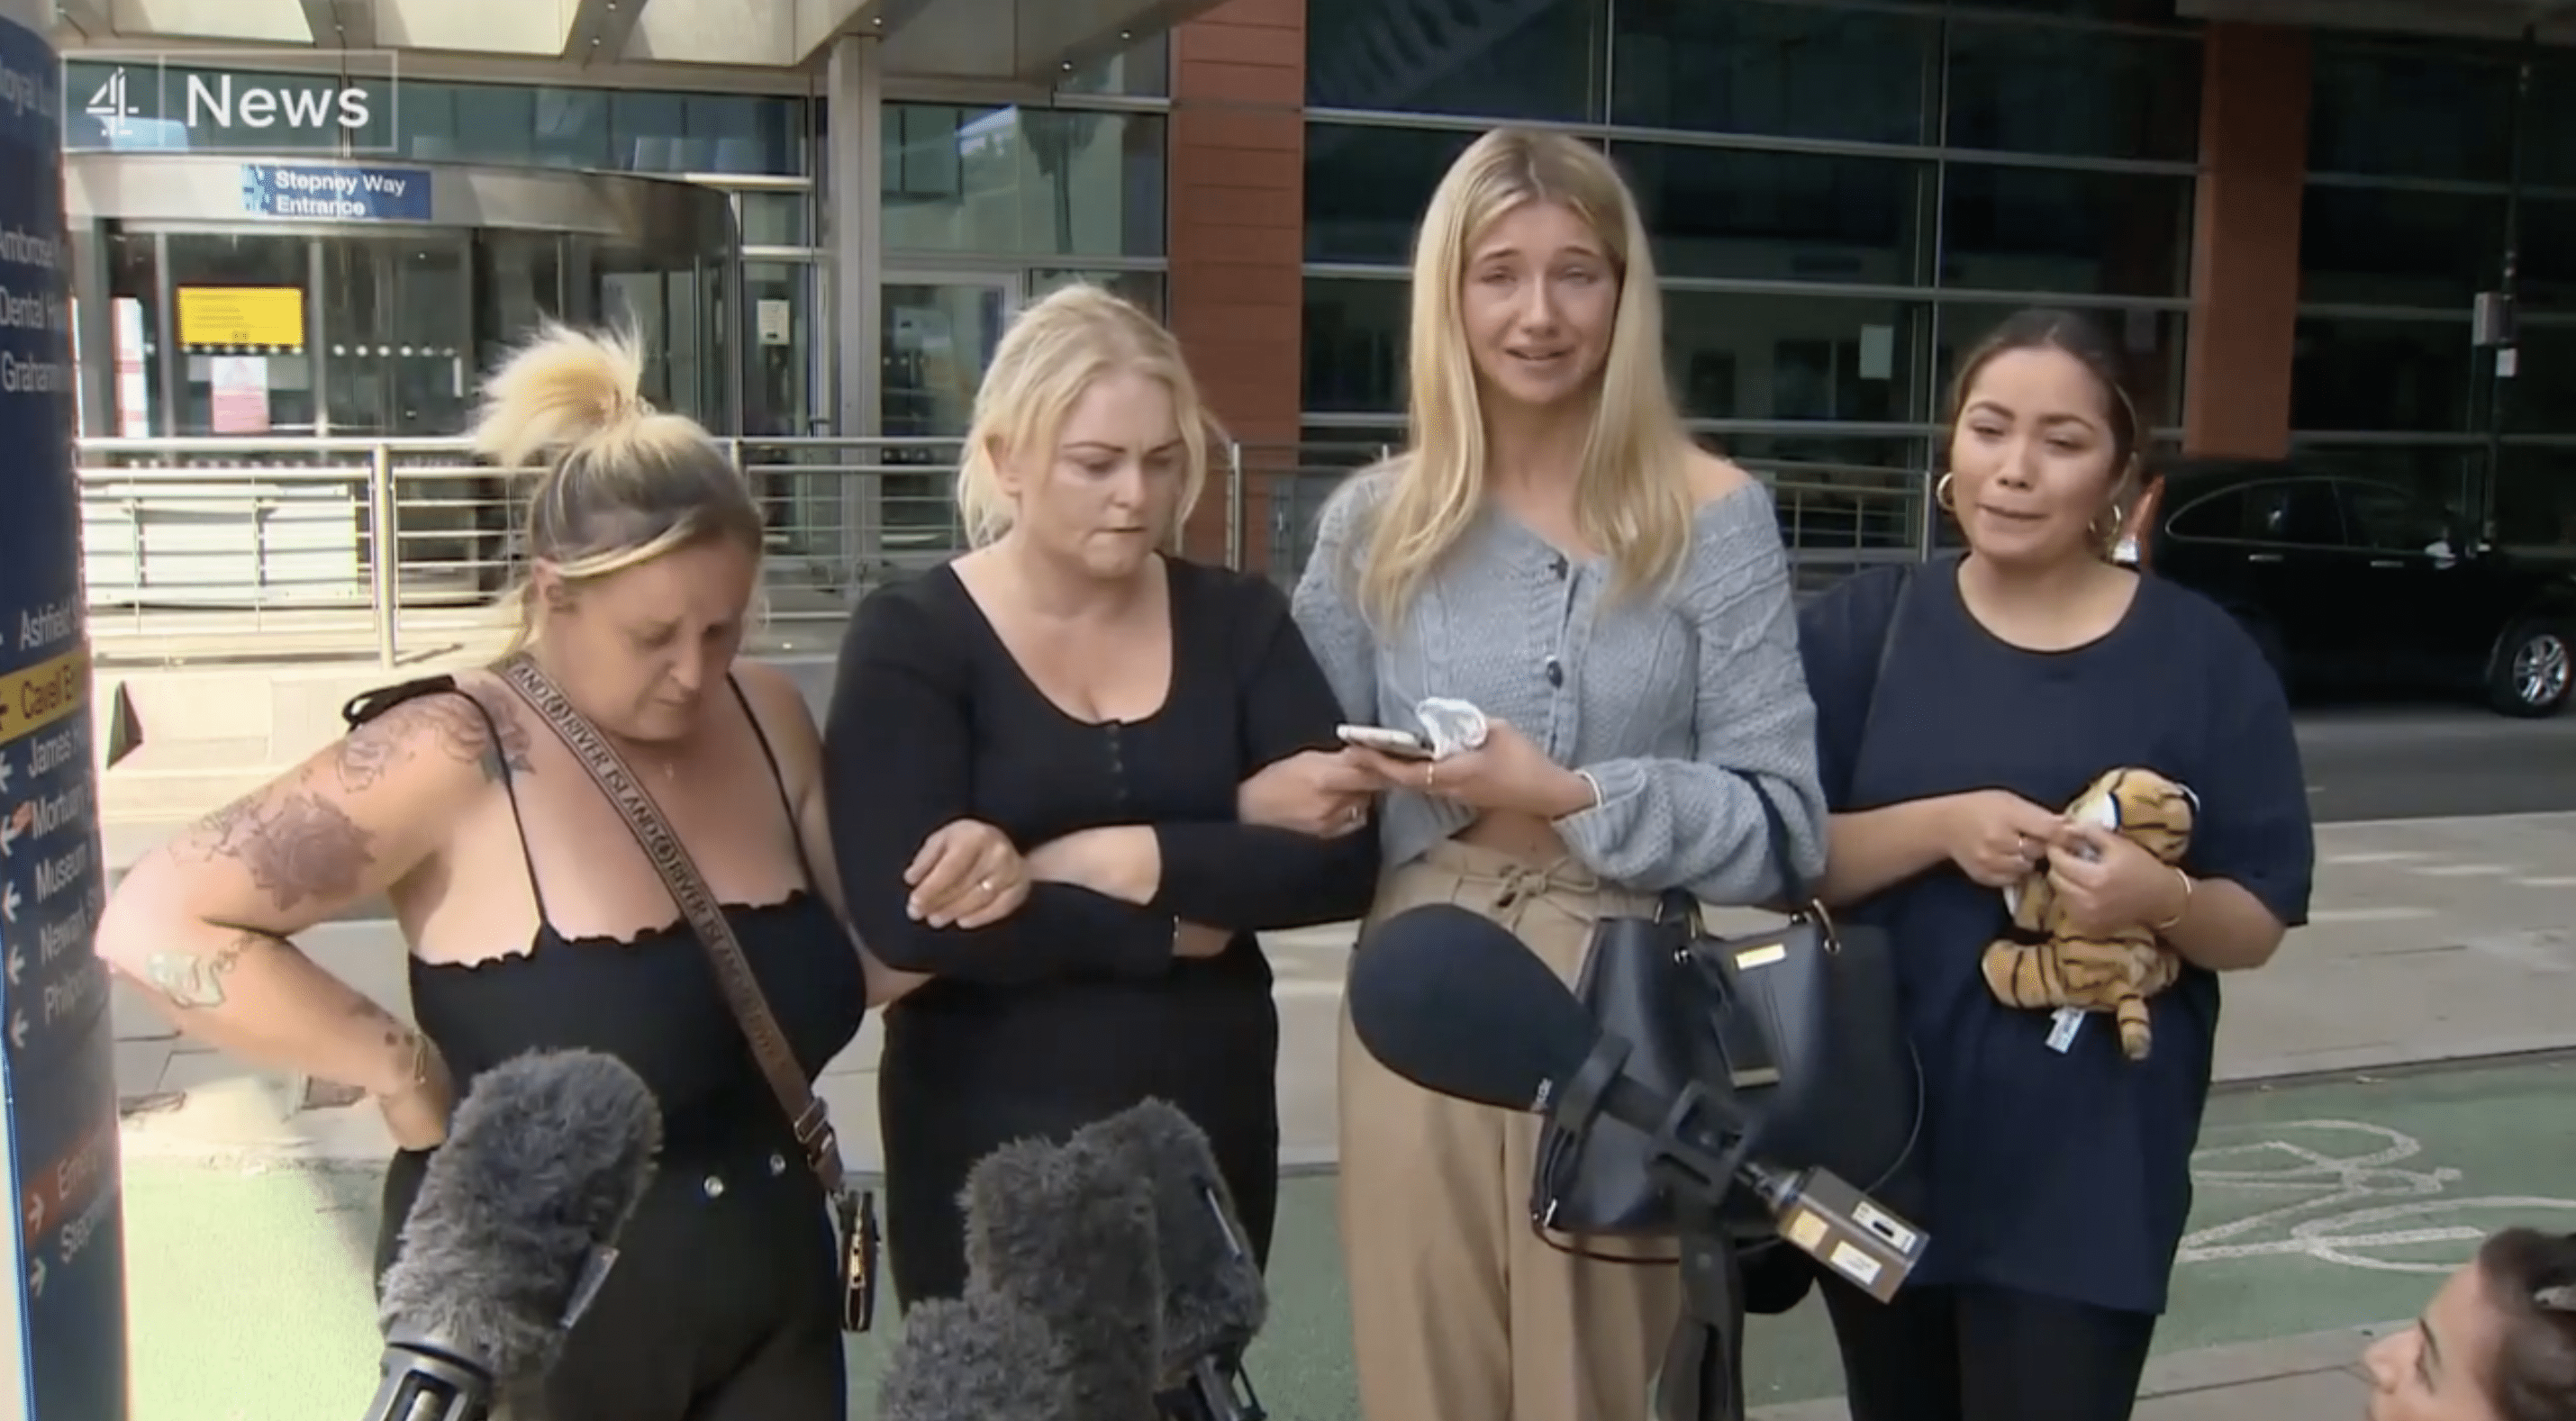 Archie Battersbee's mom, Hollie Dance, sister-in-law, Ella Carter, and other relatives gather outside the hospital to share their thoughts and feelings. | Source: facebook.com/Channel4News